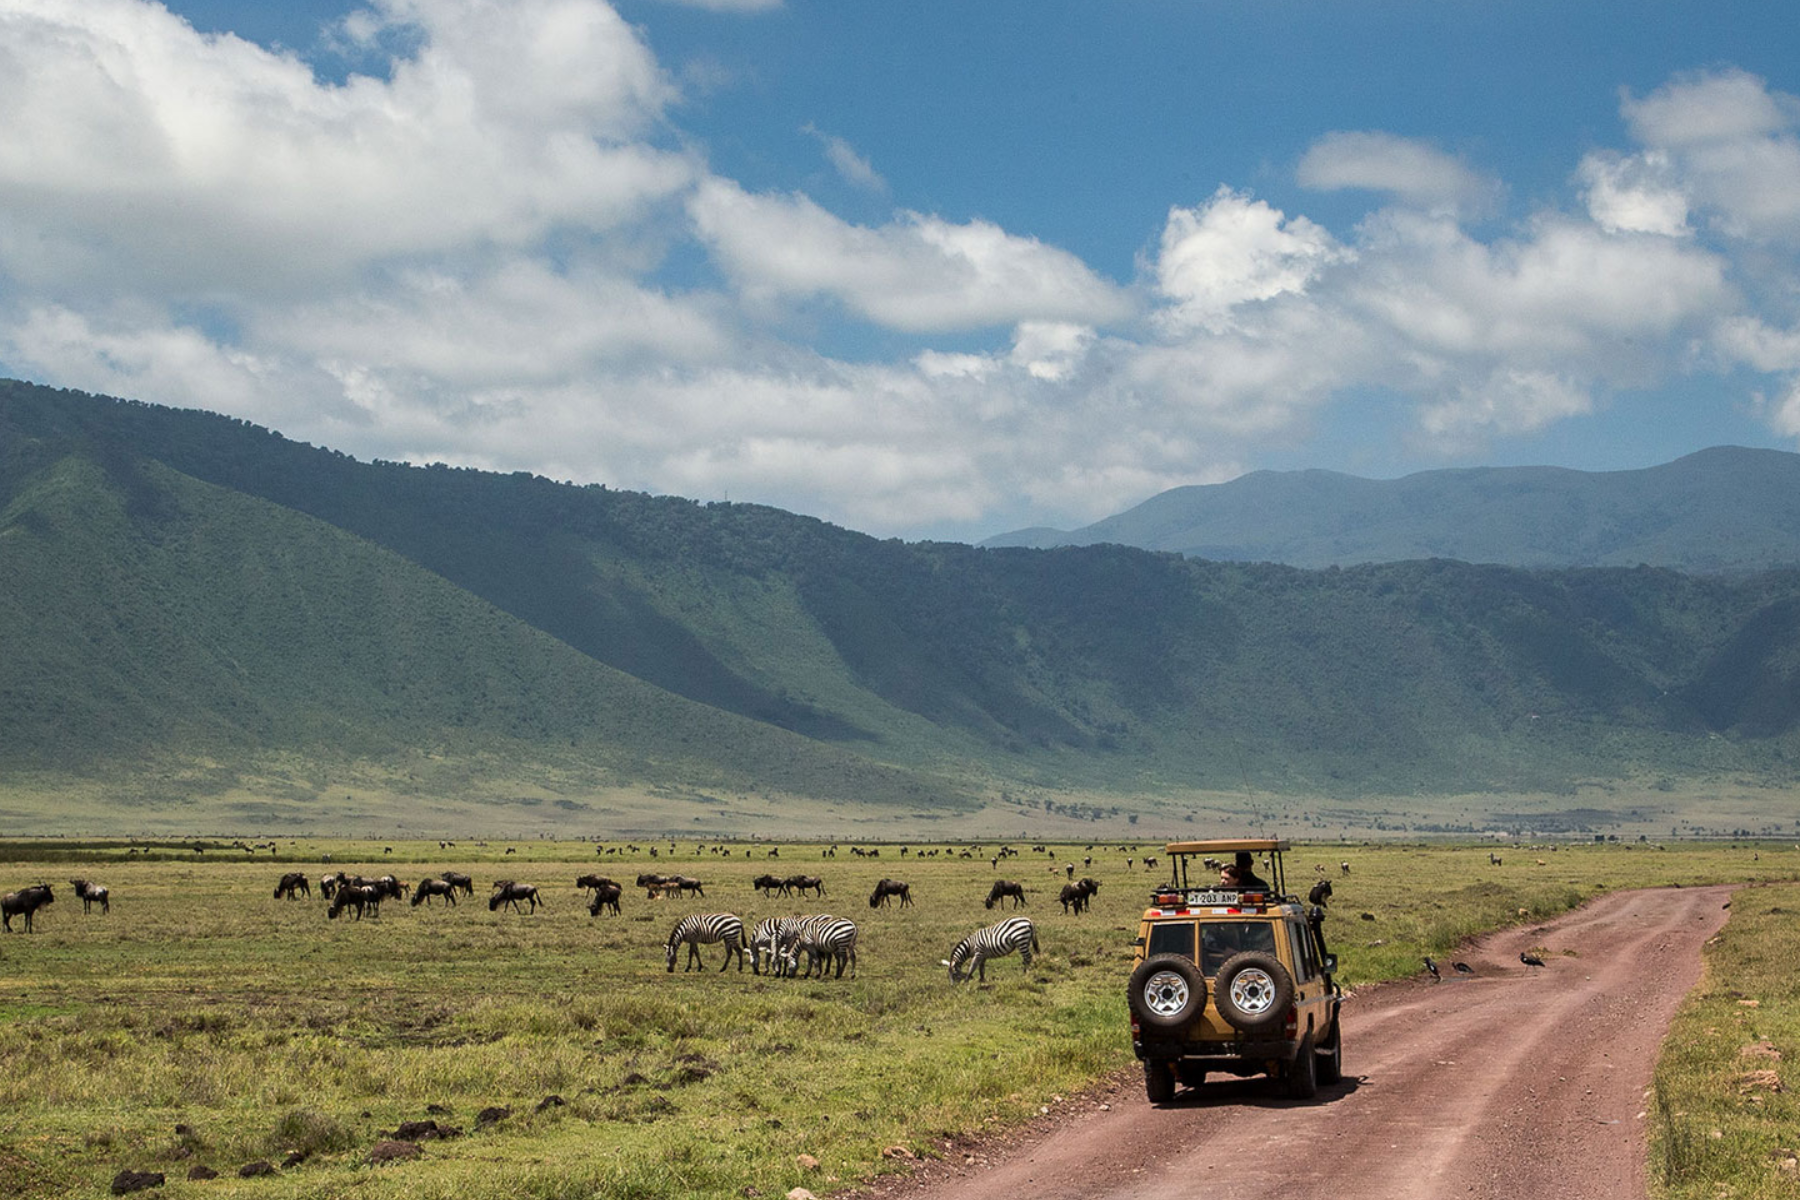 Best Place To Stay Ngorongoro Crater - Top Recommended Places